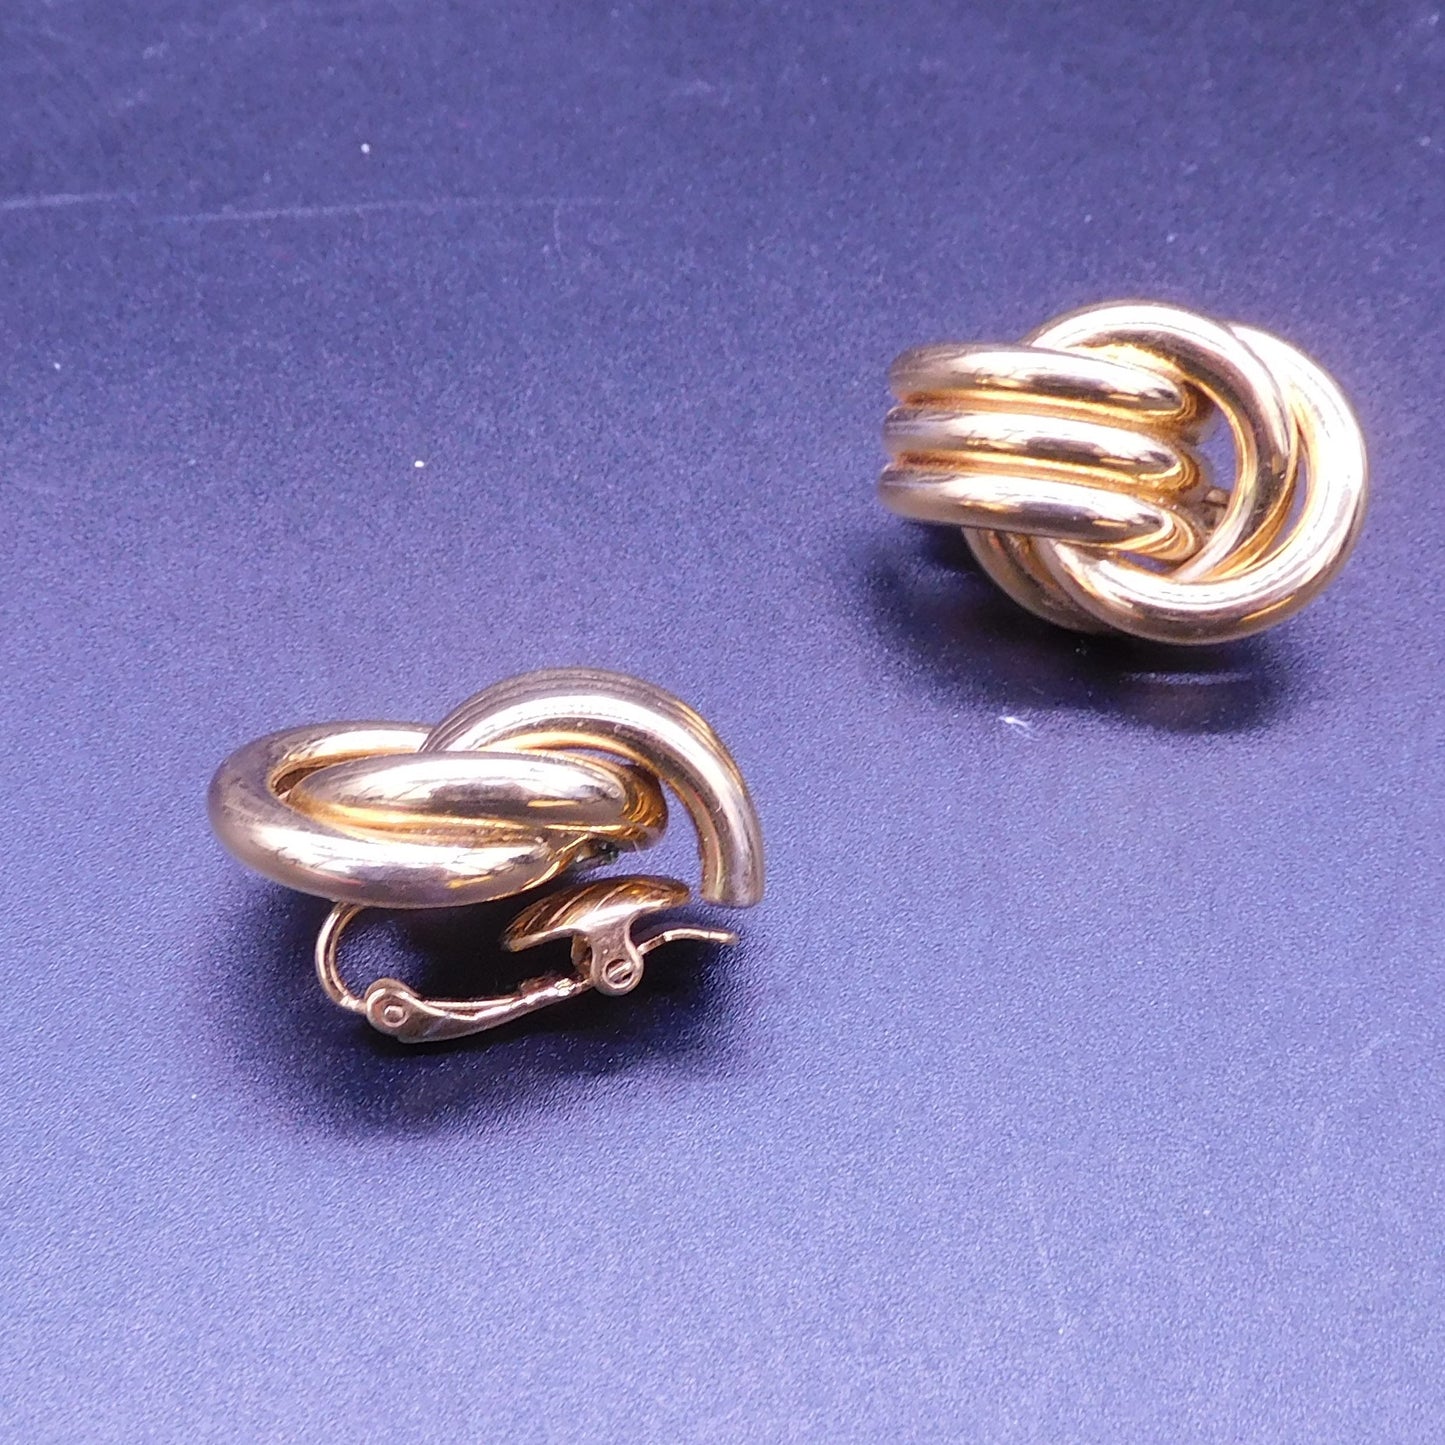 Vintage Triple Pipe, Hollow, Gold Tone Knot Clip On Earrings 7204c